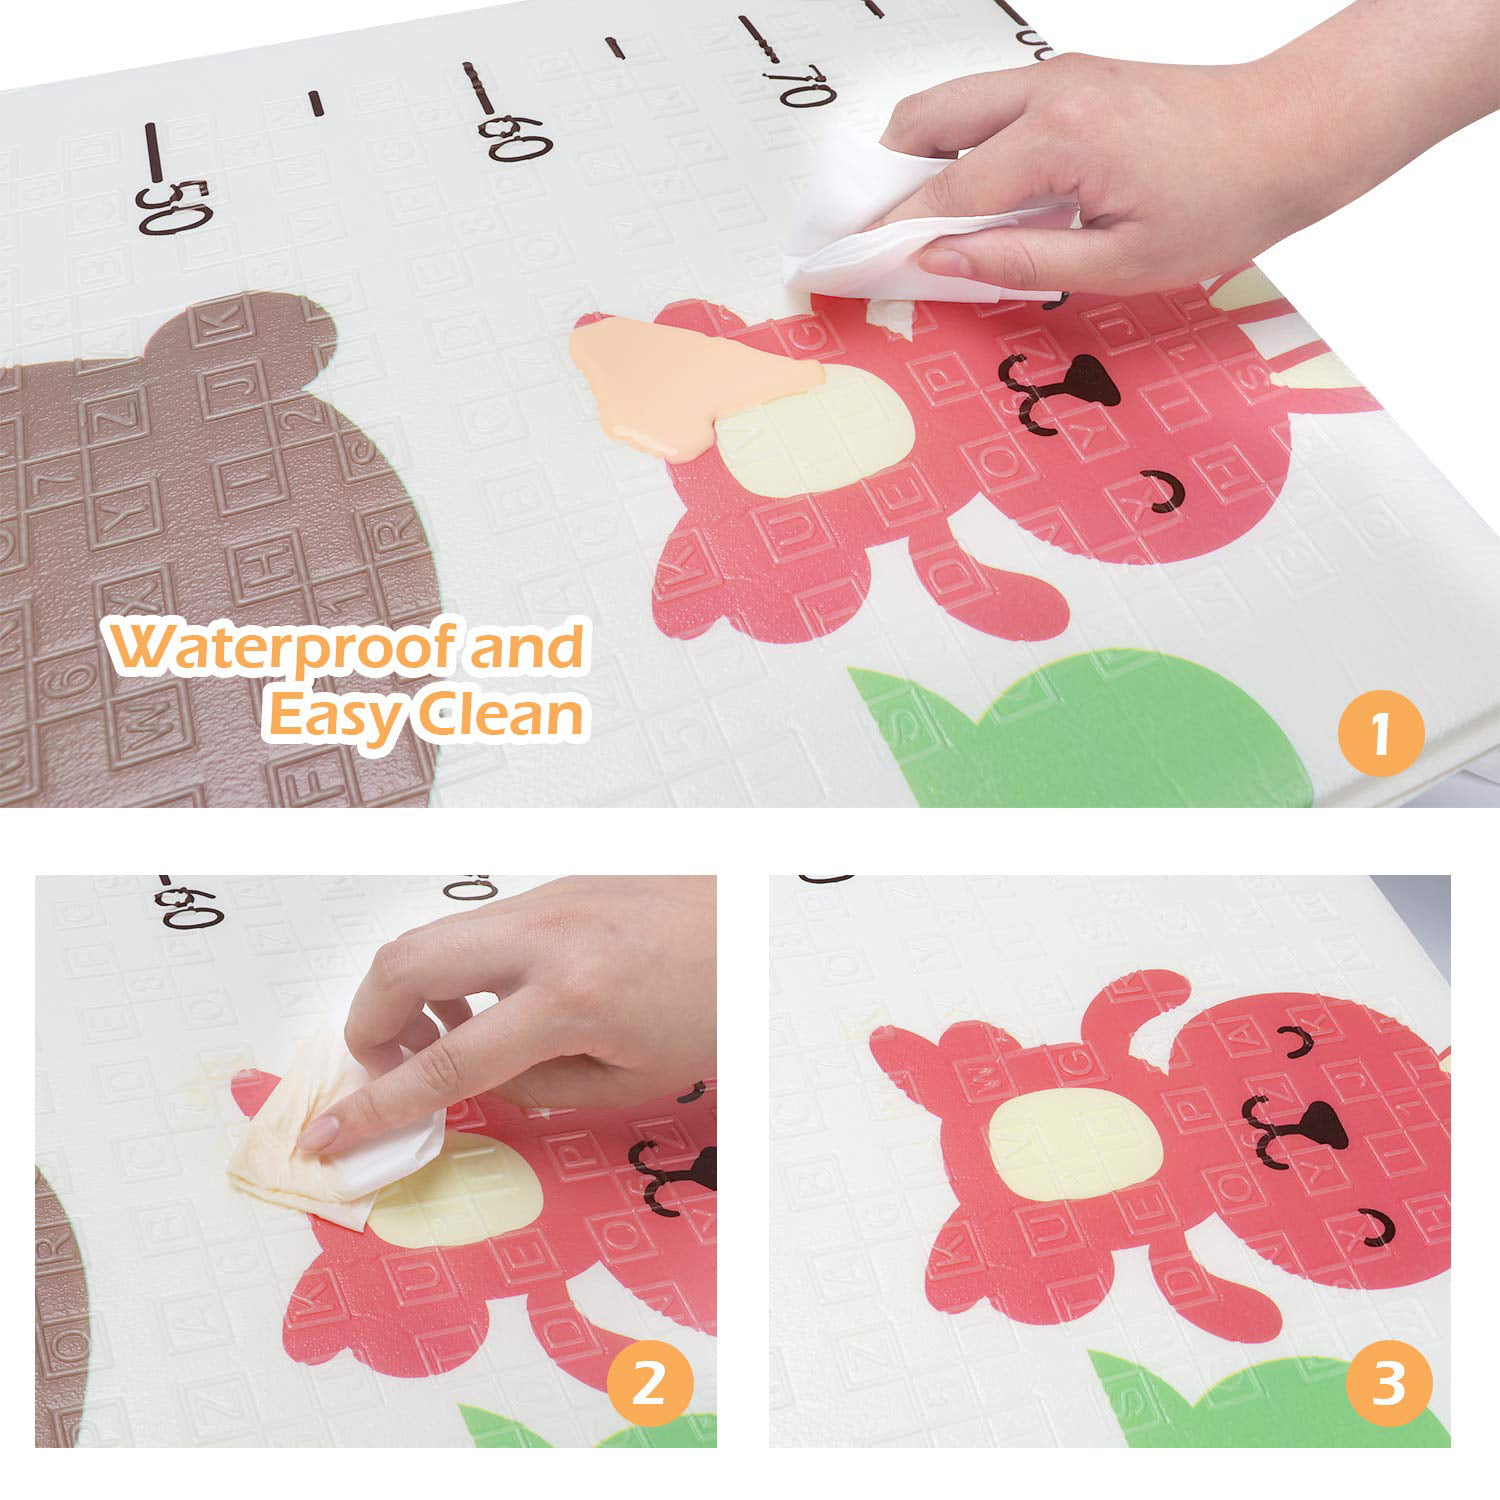 Toddlers Bammax Play Mat Non Toxic Baby Crawling Mat Waterproof Kids Playmat for Babies Infants